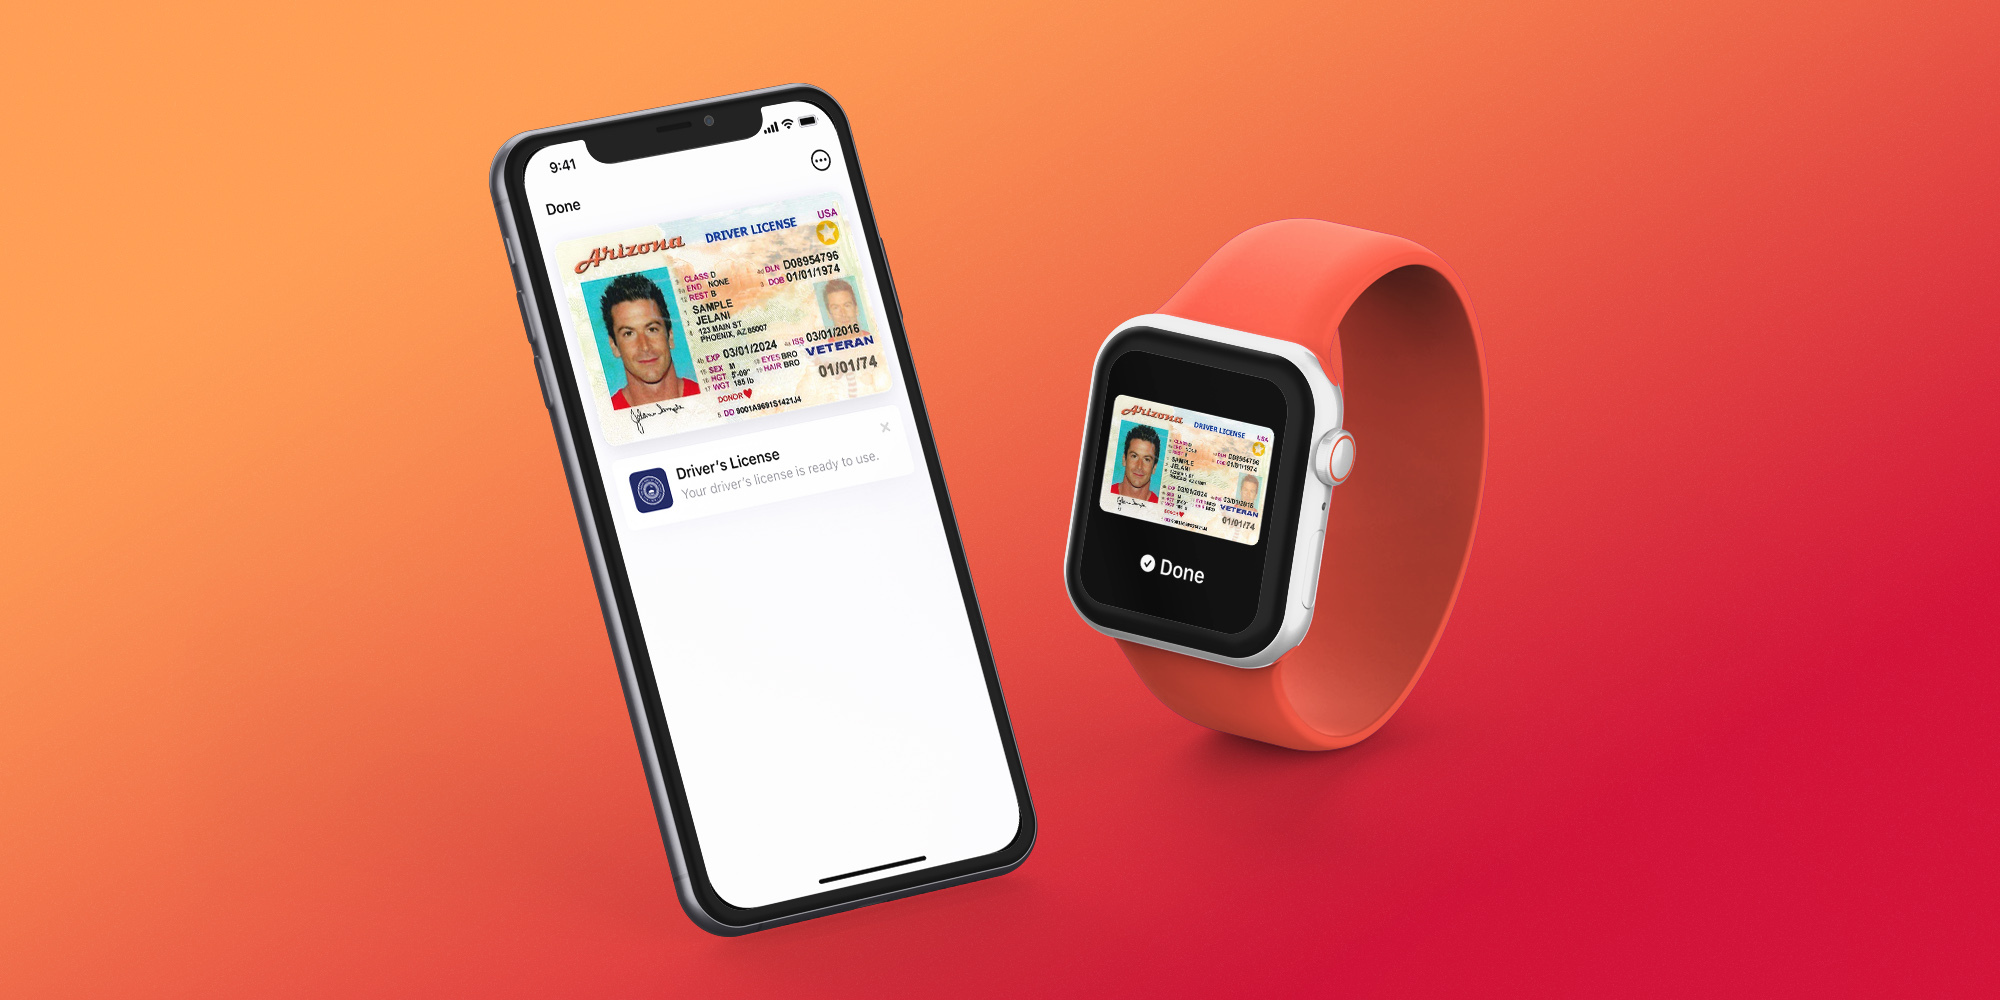 Apple reveals first states to use Apple Wallet for ID, driver's